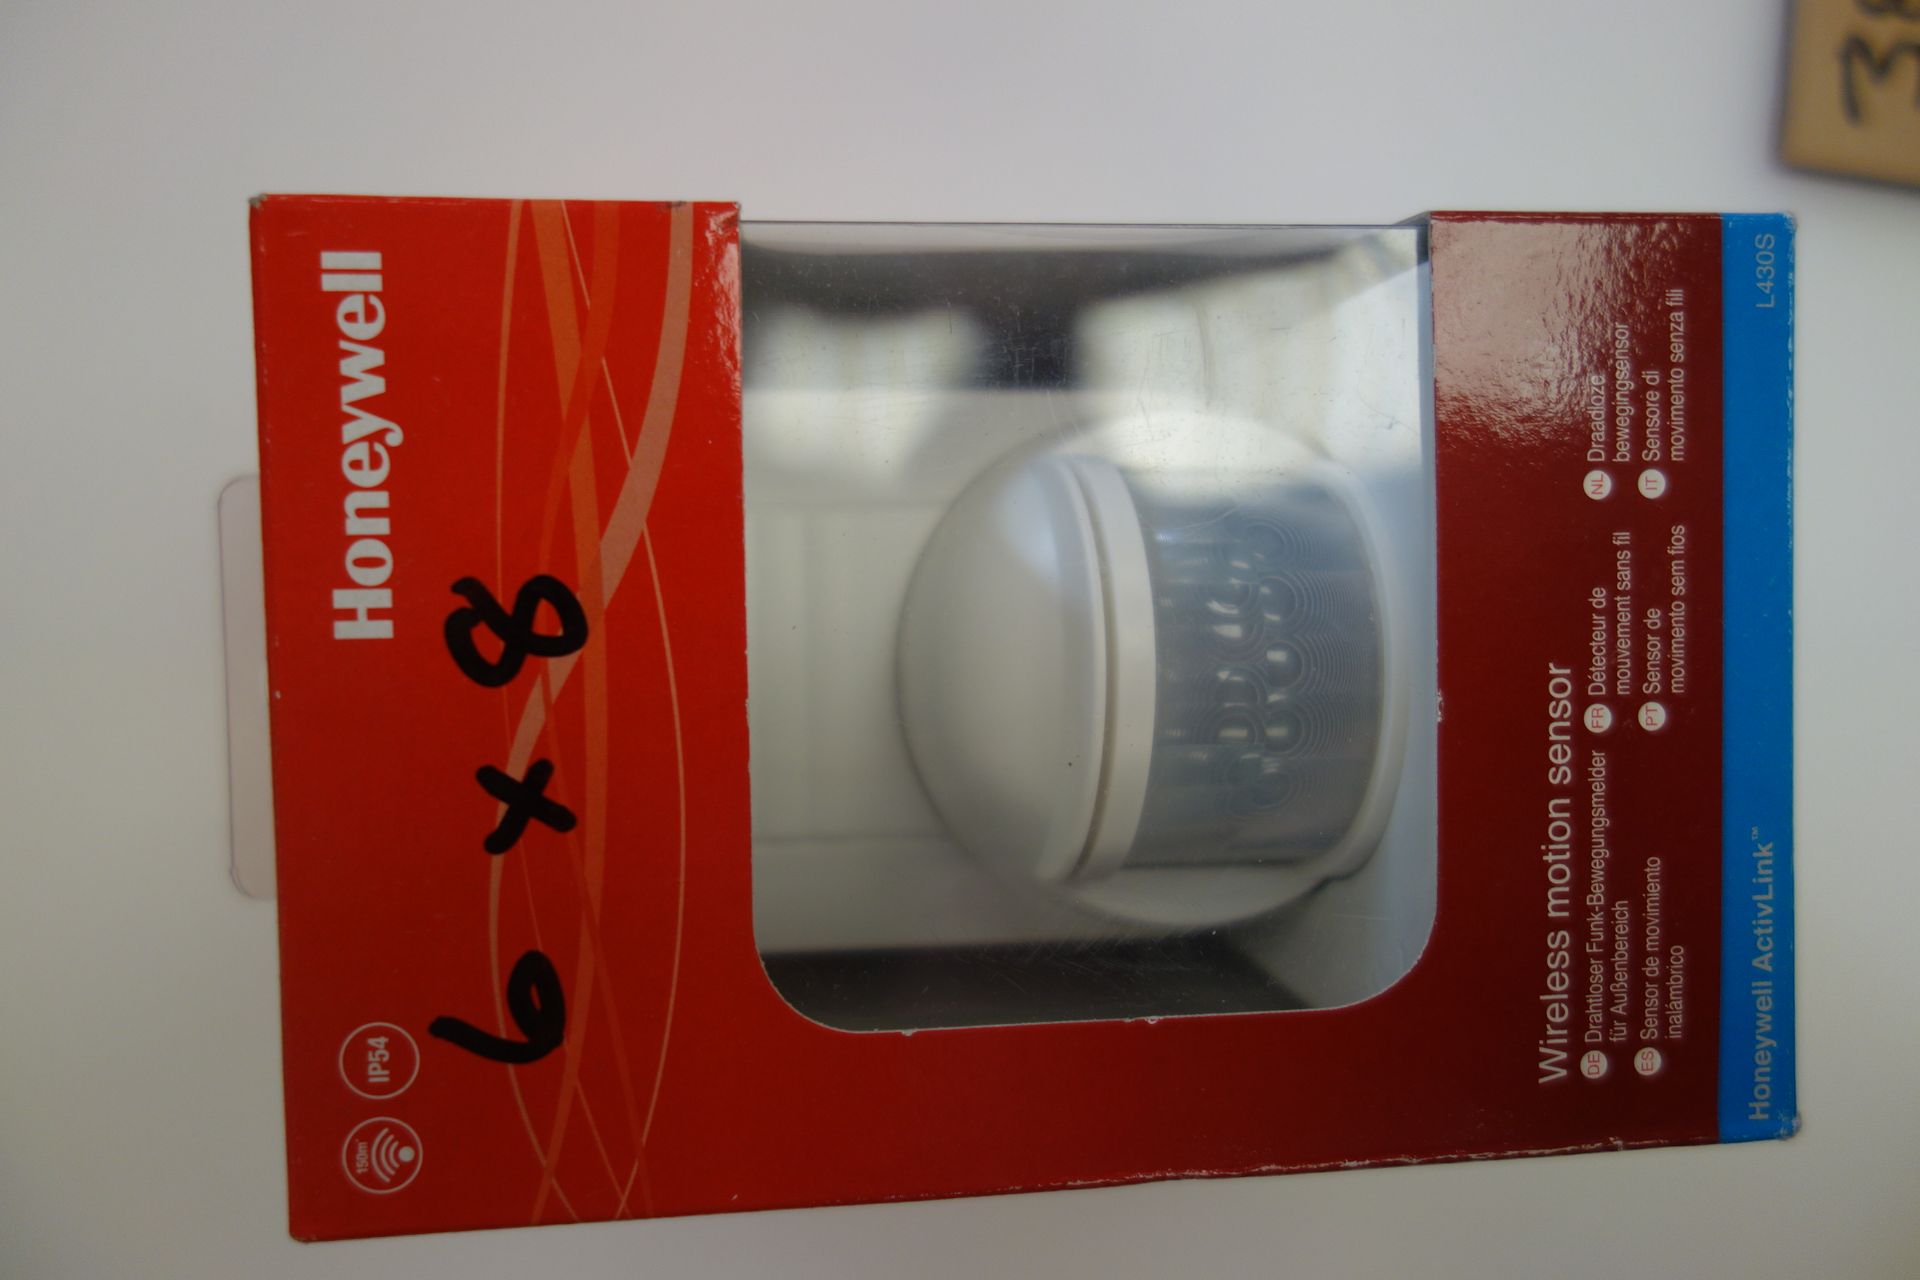 8 X Honeywell L4305 Wireless Motion Sensor Monitor Large Areas The Home With 140 Degres + 12M Sensor